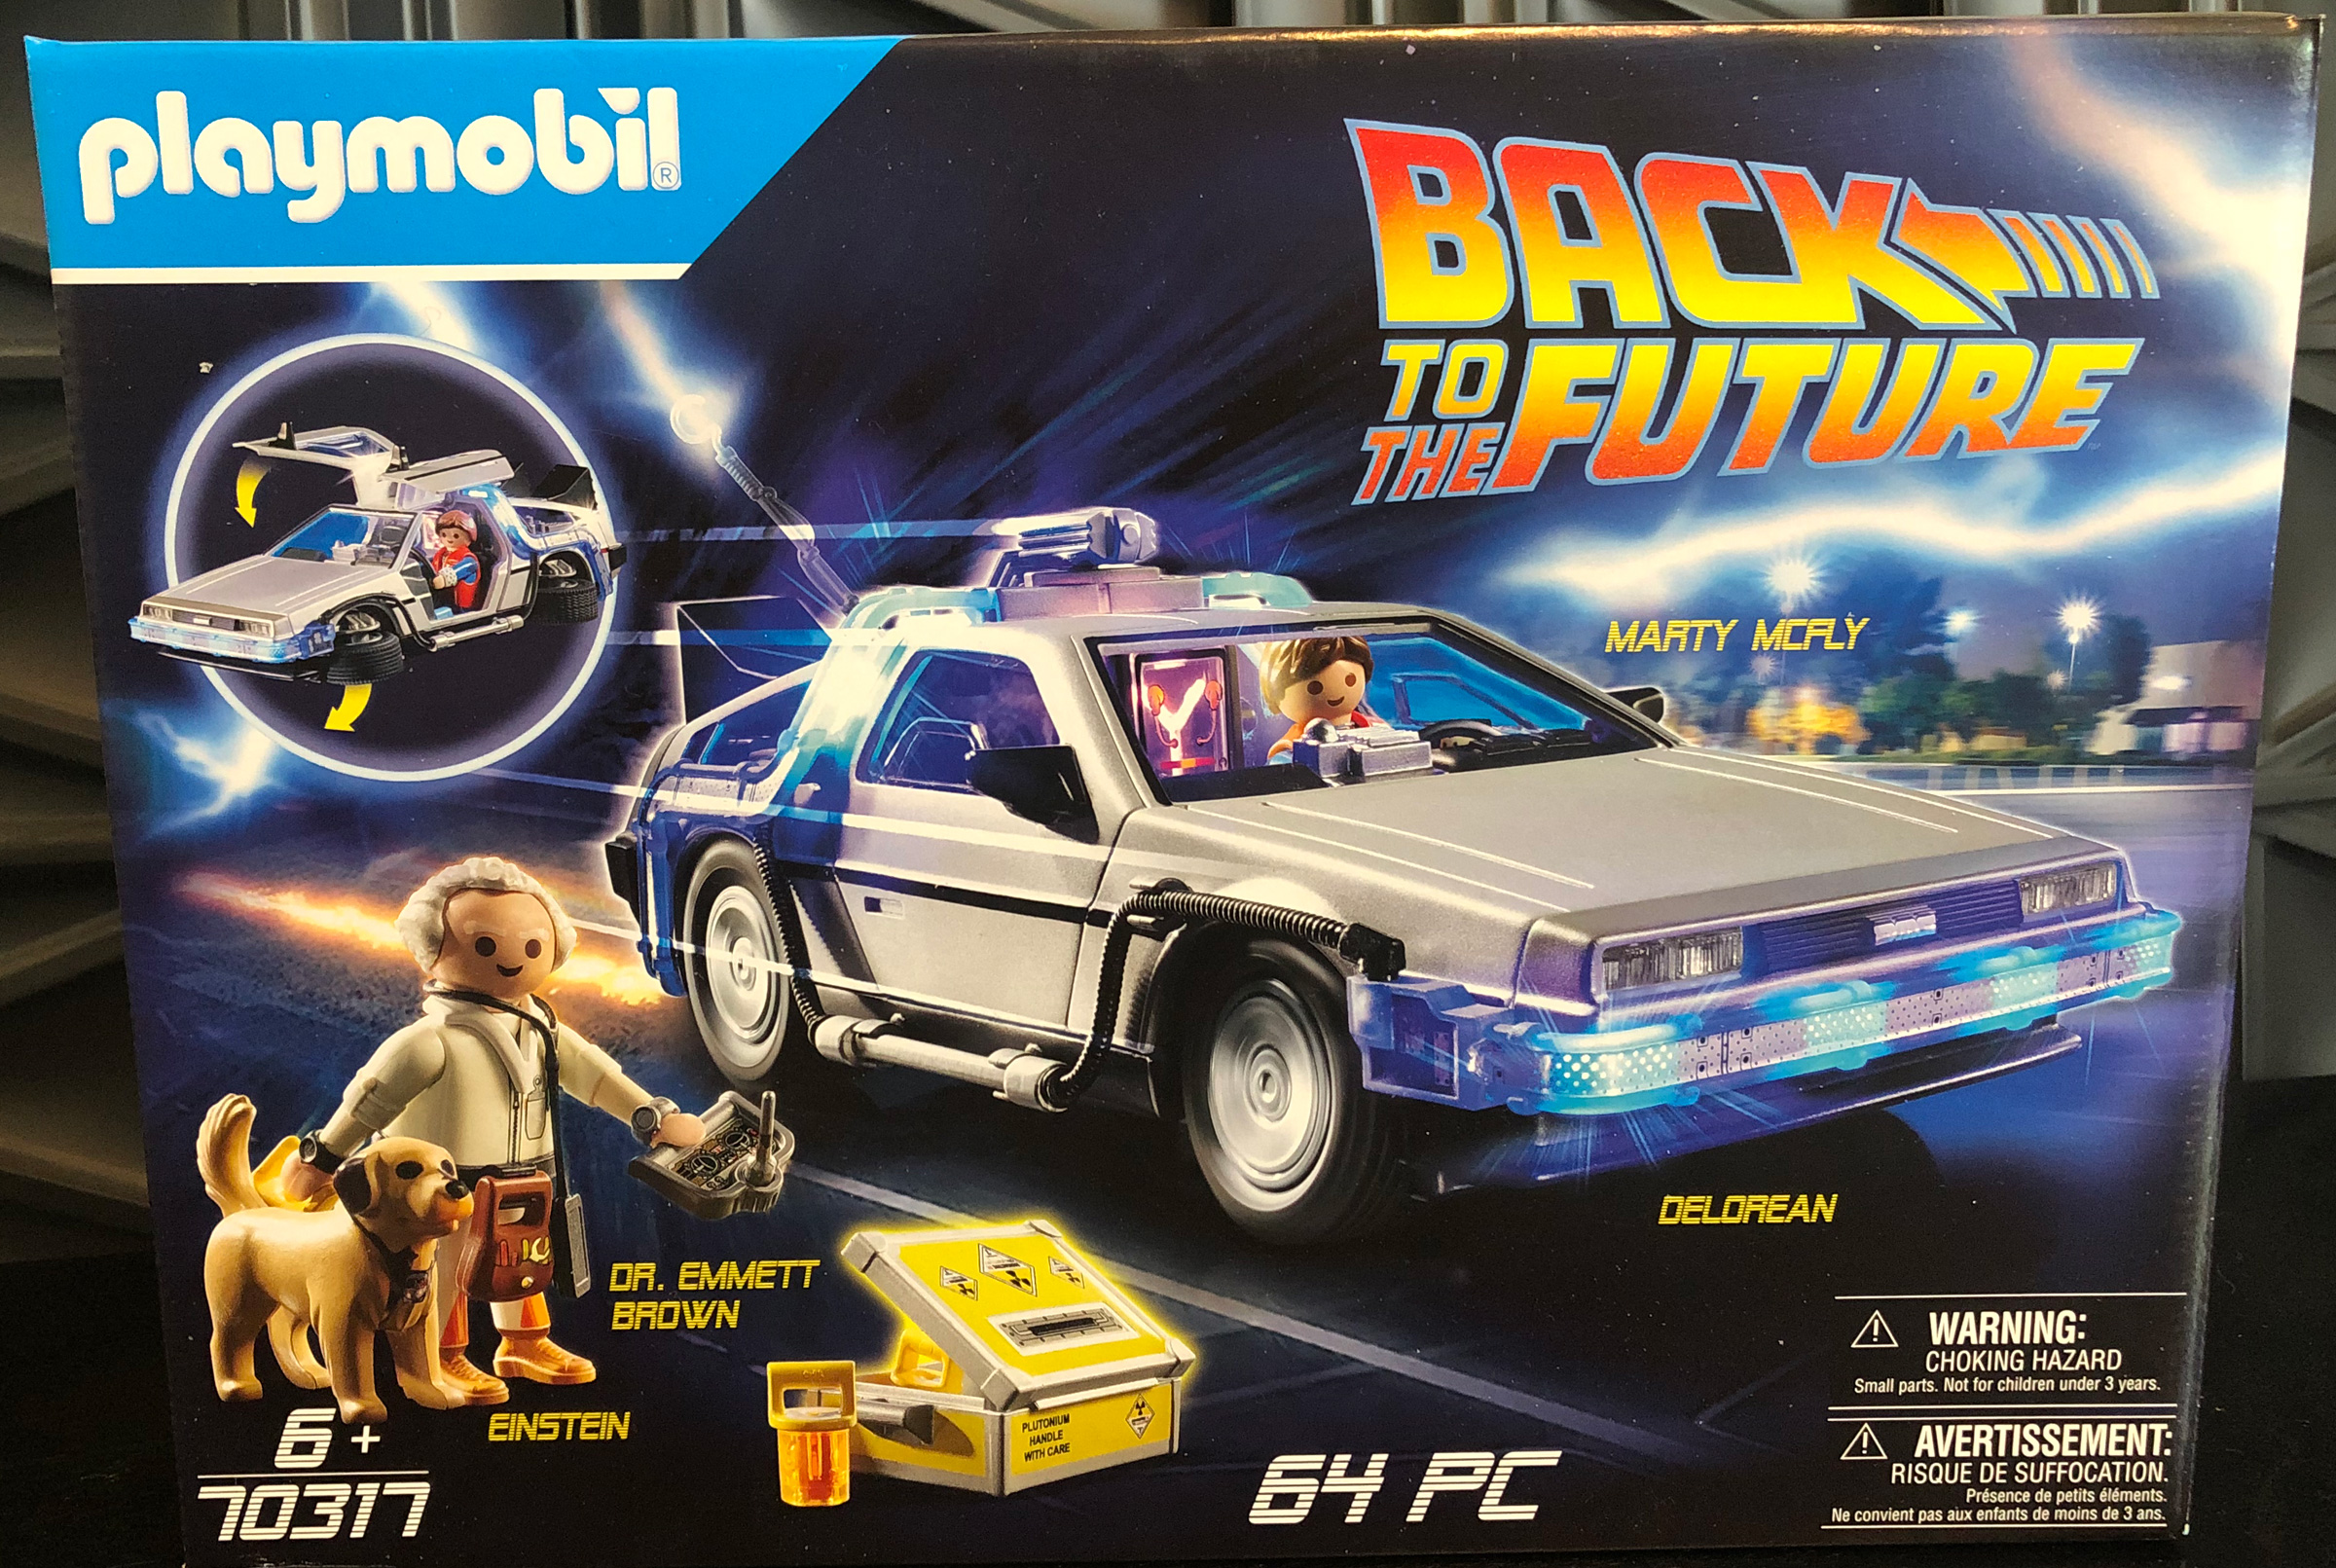 Playmobil Playland: 'Back to the Future' - GeekDad